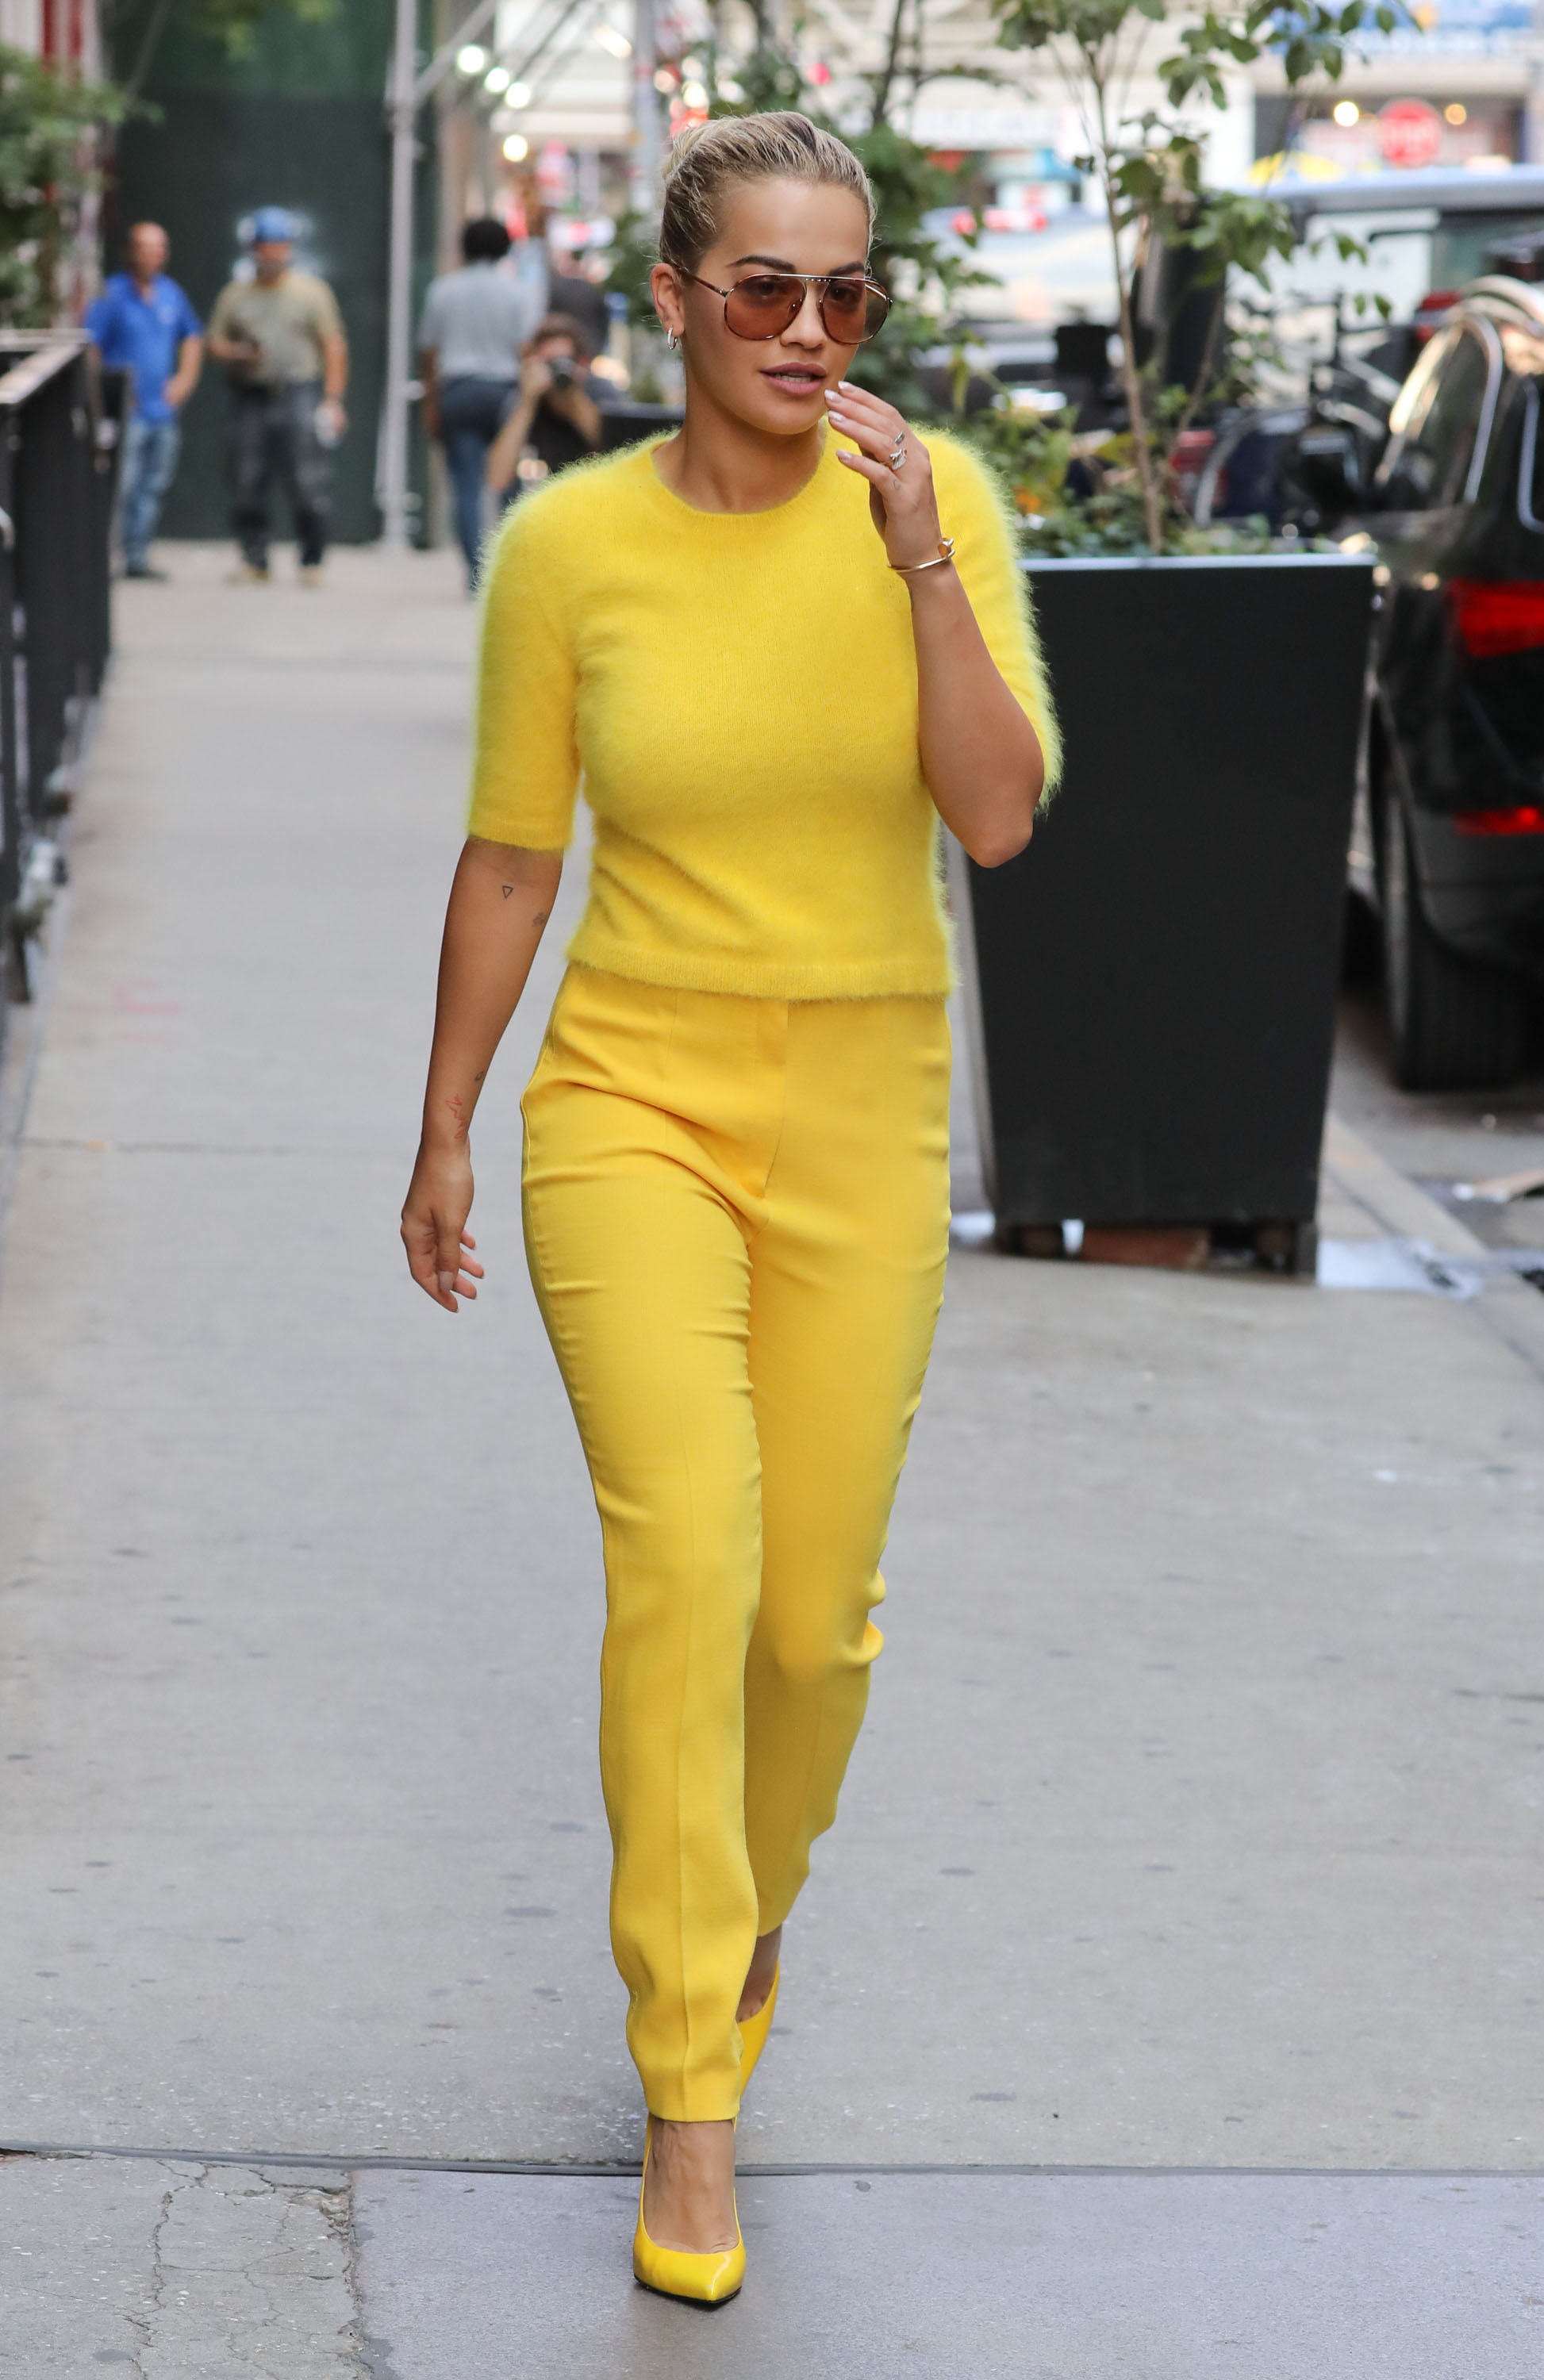 Rita Ora steps out dressed head to toe in yellow in New York City_06.jpg